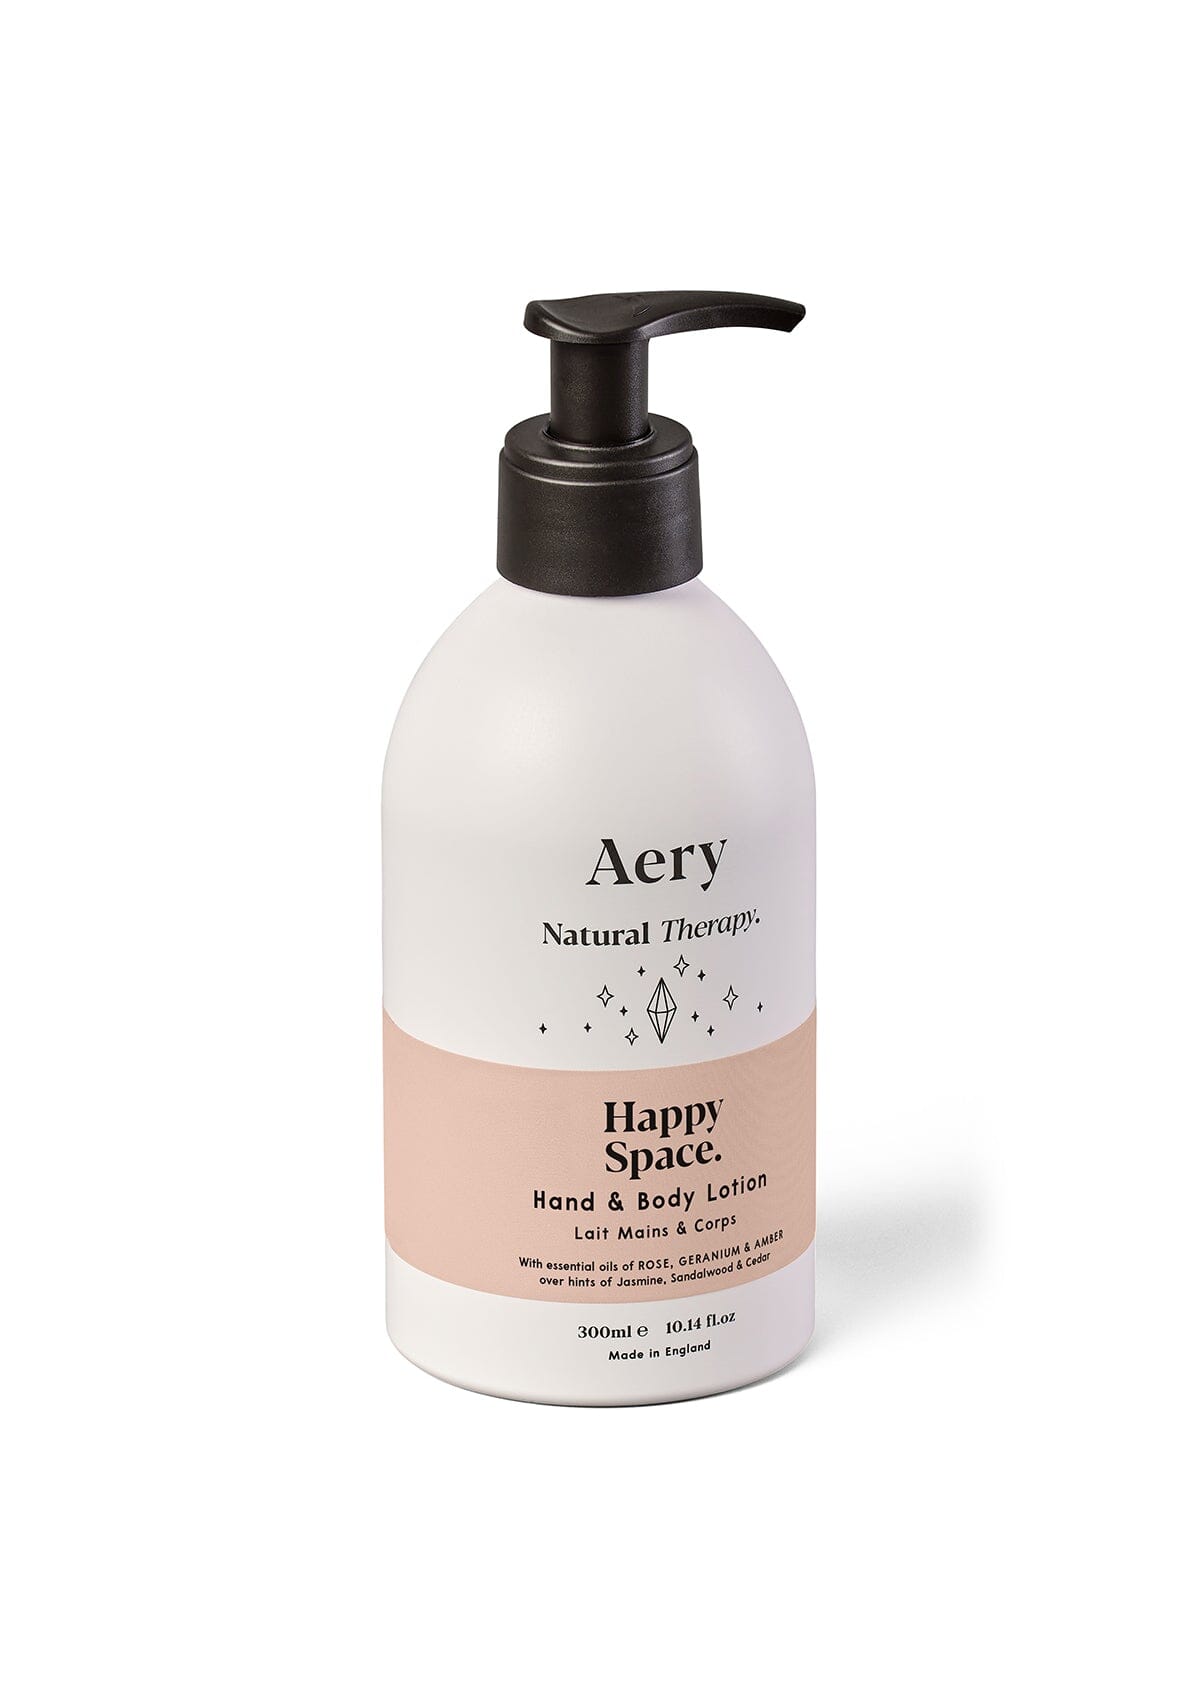 Pink Happy Space Hand and Body Lotion by Aery displayed on white background